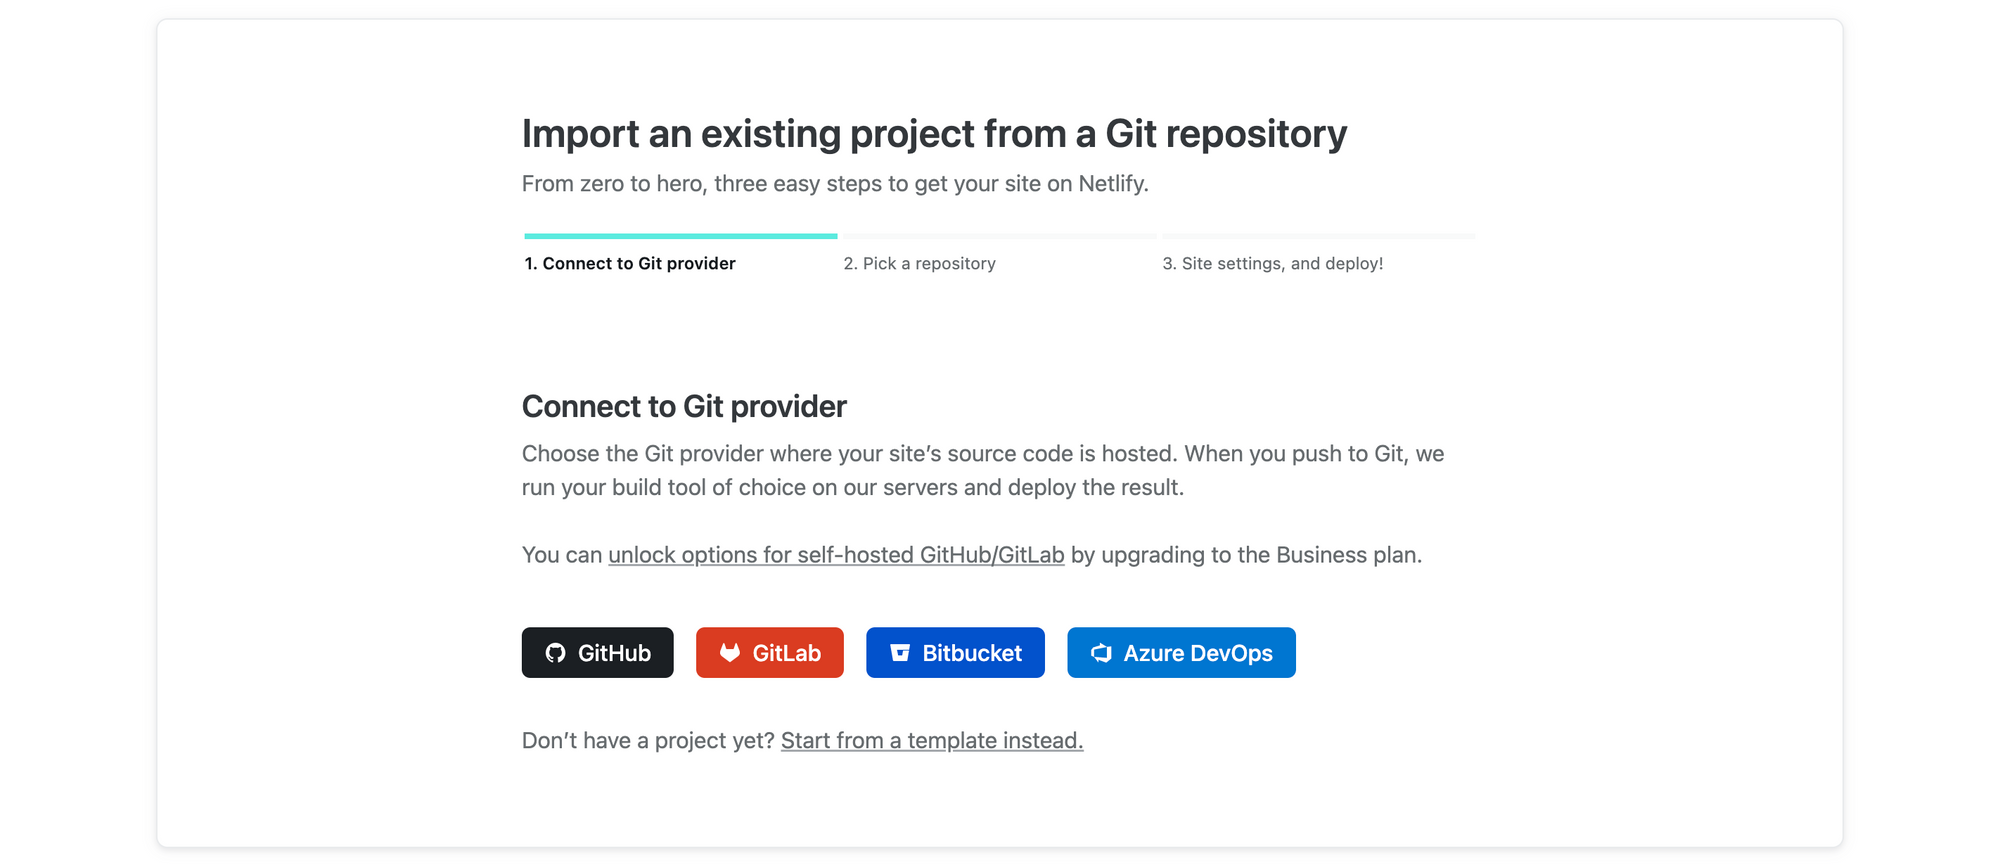 Import an existing project from Git repo